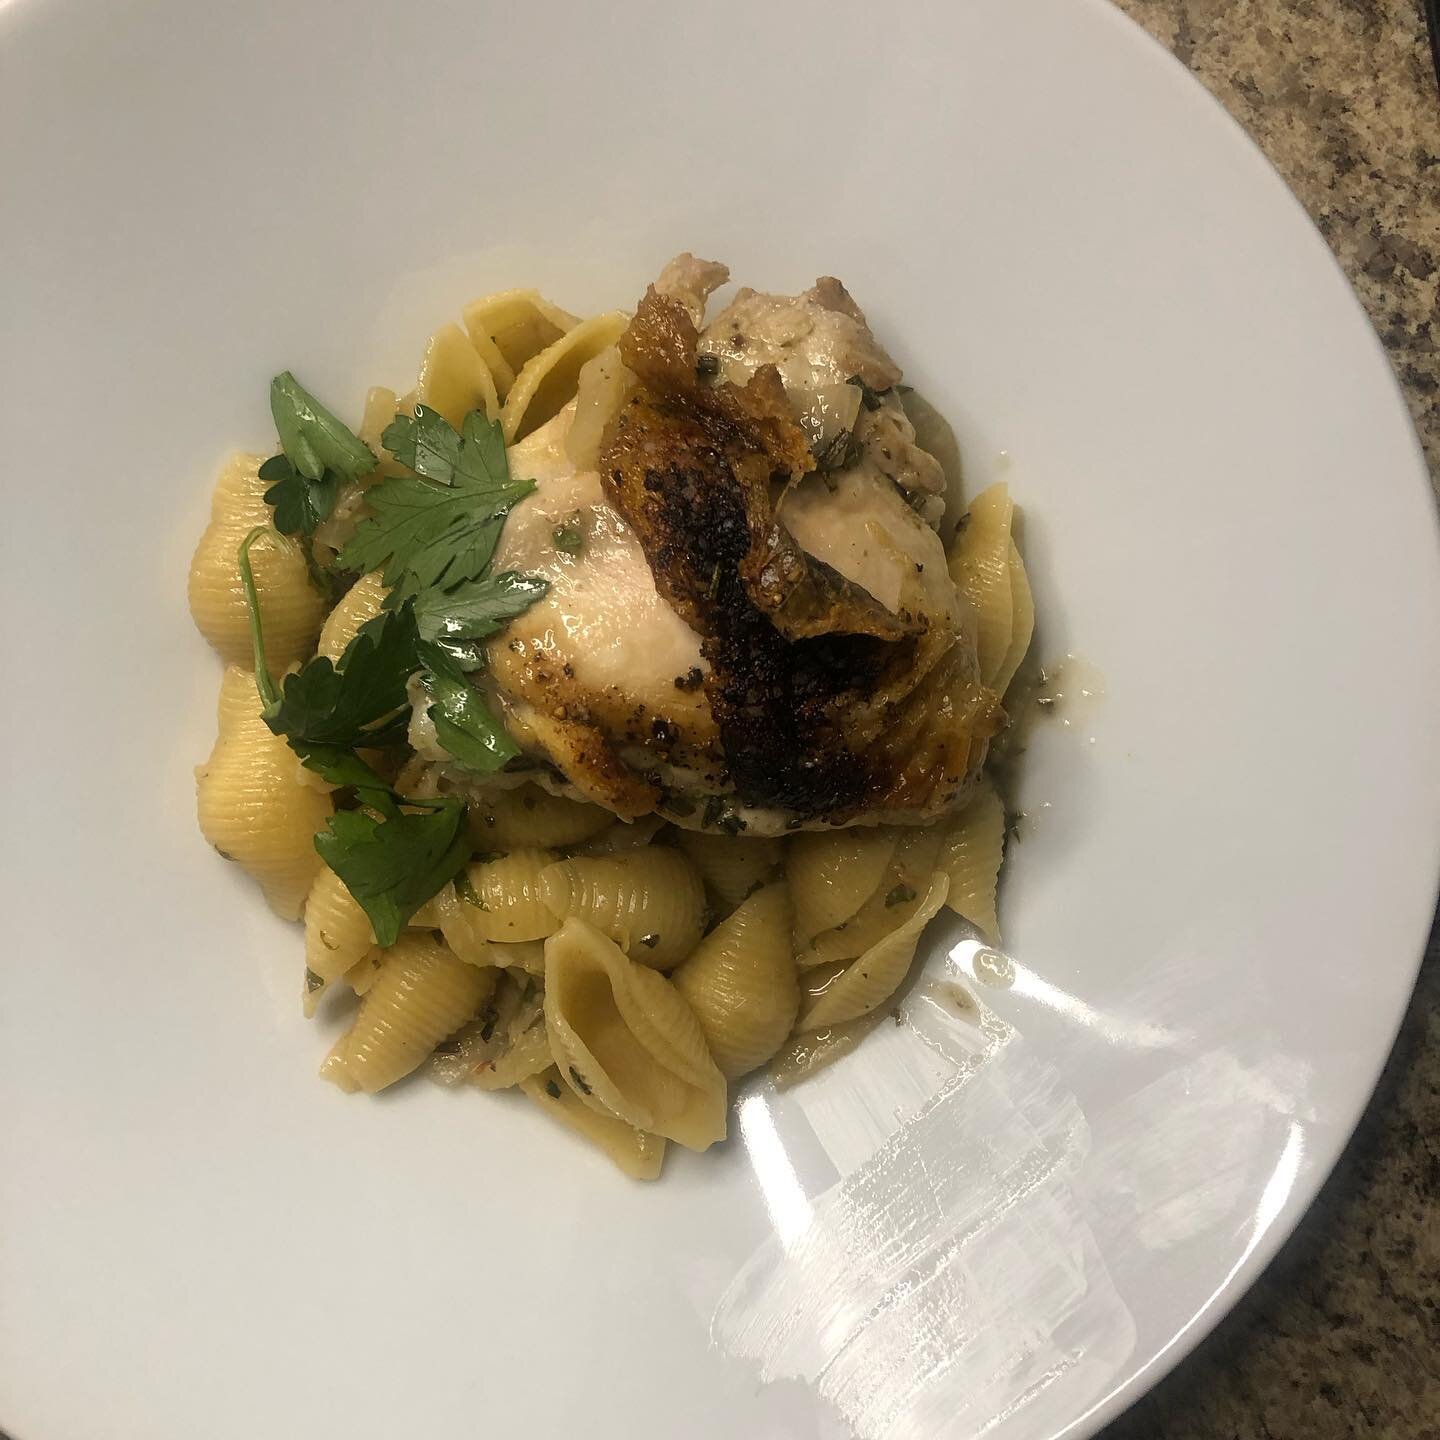 @jole_____________ and i were cheffin it up last night for a lil dinner d8 over zoom! @bingingwithbabish suuuure knows how to make a killer pasta dish!!
little bitta fennel little bitta chicky&hellip; lil rosemary lemon chilli garlic action in there.